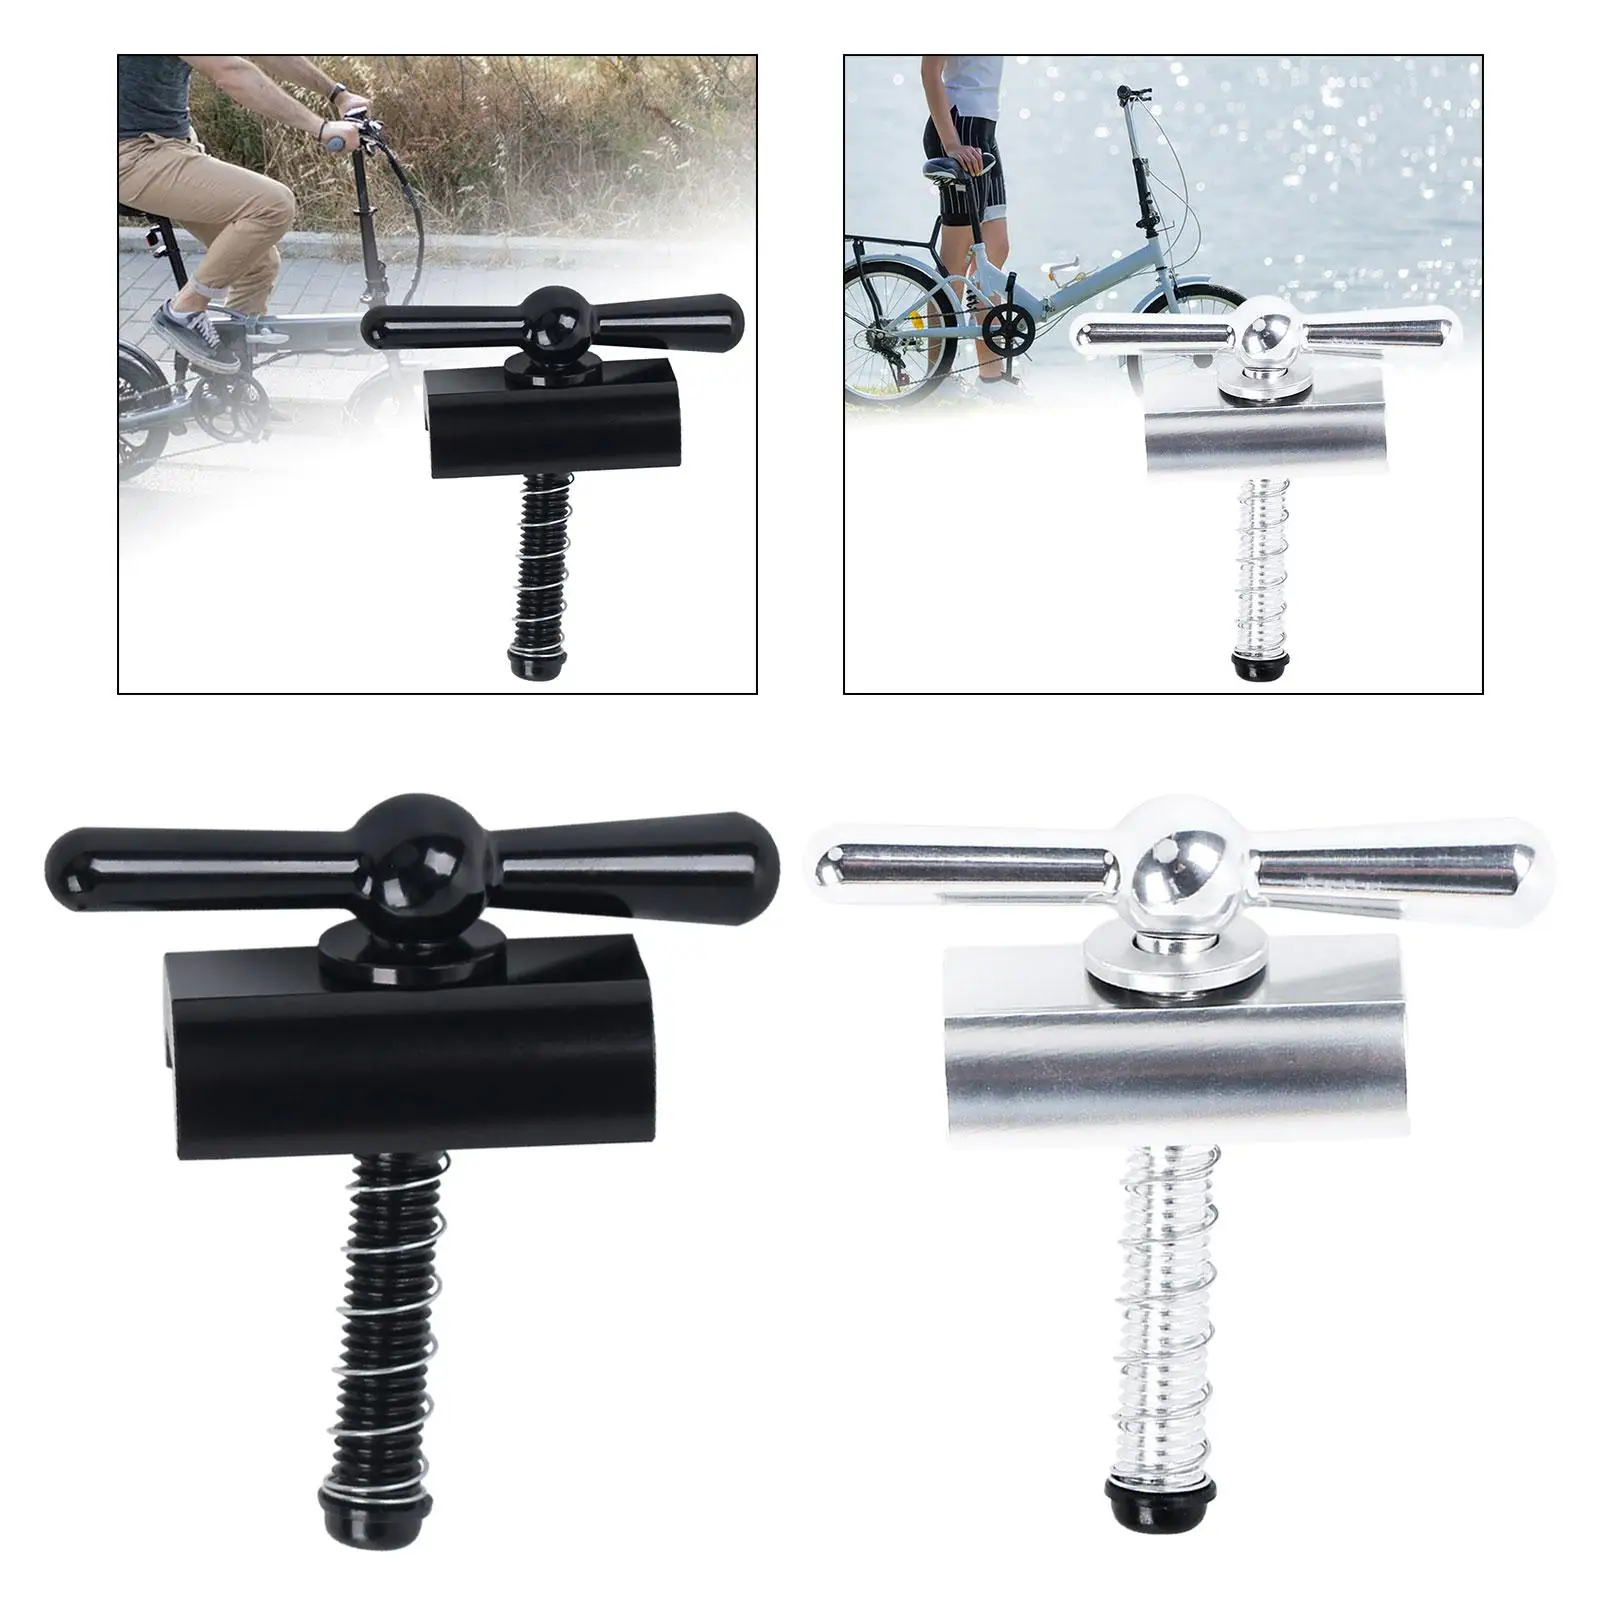 Folding Bike Hinge Clamp Lightweight High Strength CNC Hinge Clamp Plate Foldable Bicycle Accessories for Headset Replacement